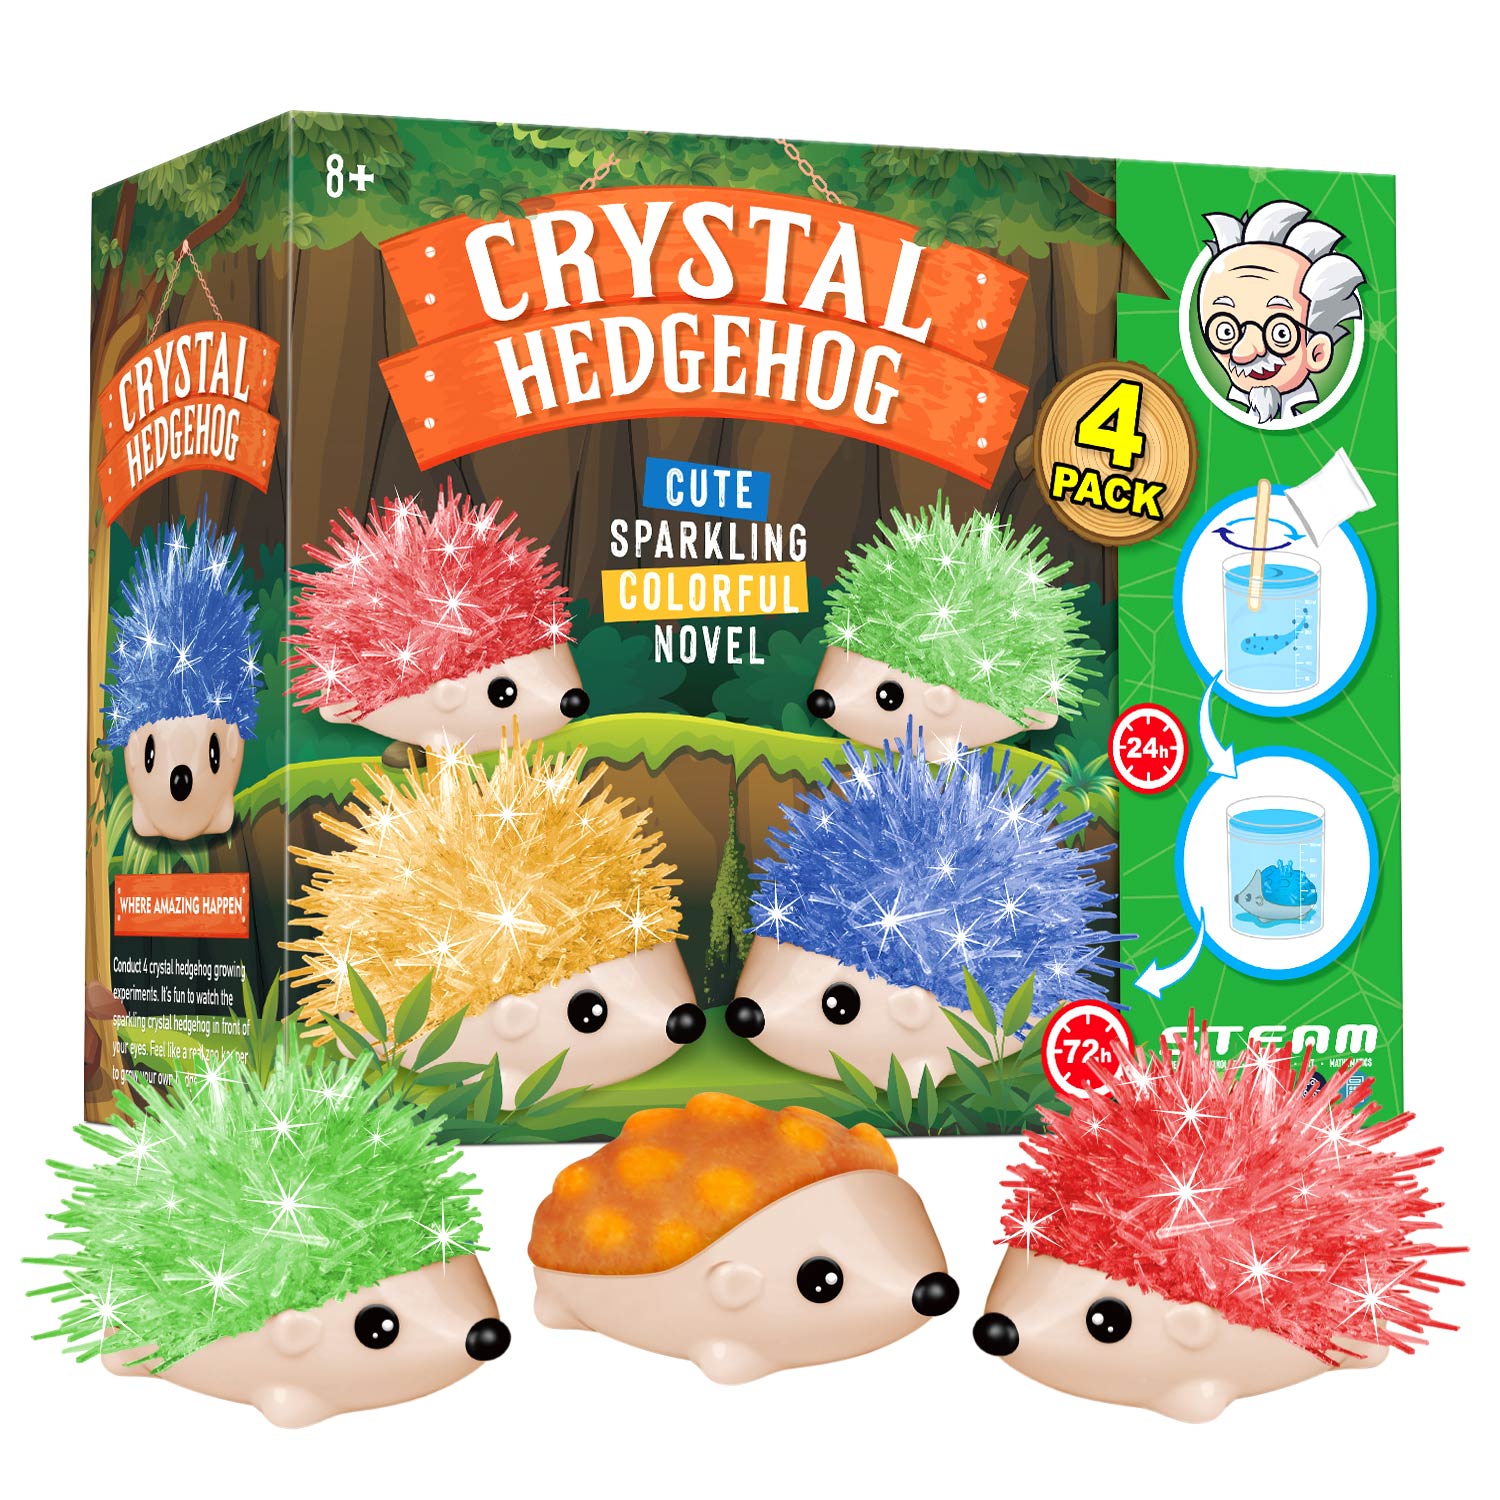 Arts and Crafts Animal Crystal Growing Kit for Kids Science Kits for Kids Grow Crystal Science Experiments Toys DIY Projects Learning & Education Toys